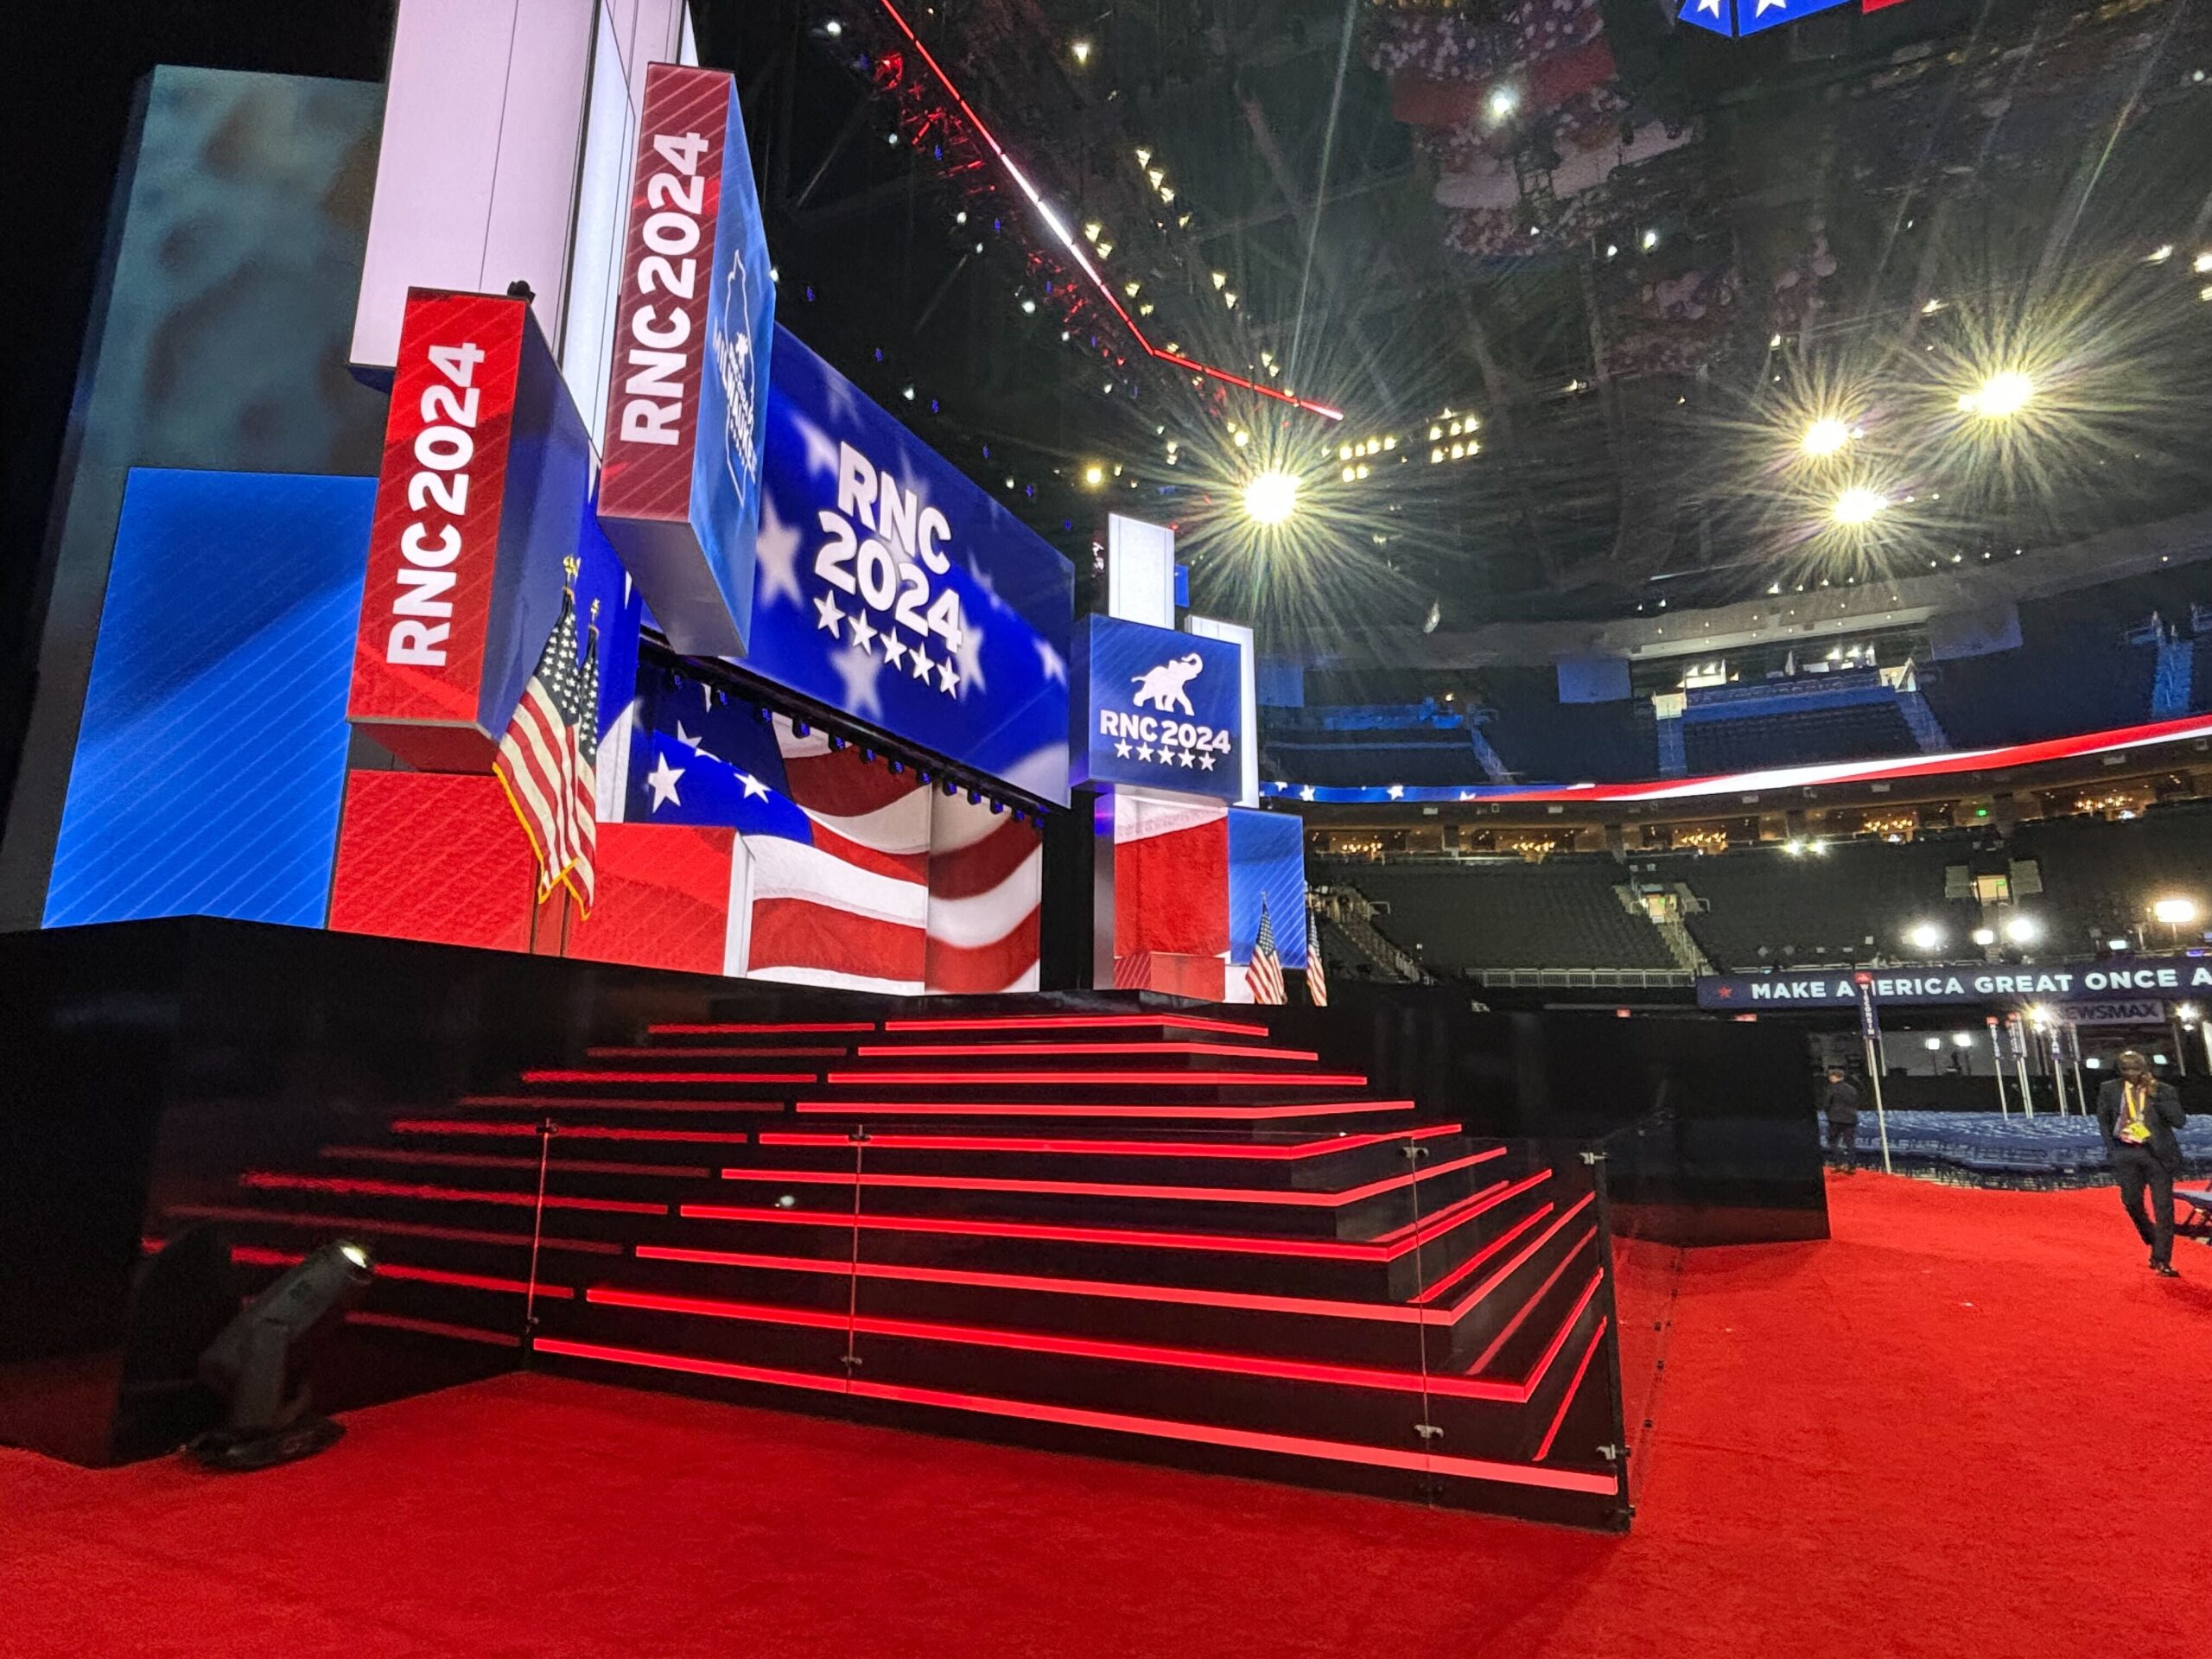 Red, white and blue signs saying "RNC 2024" surround a stage with red stairs.